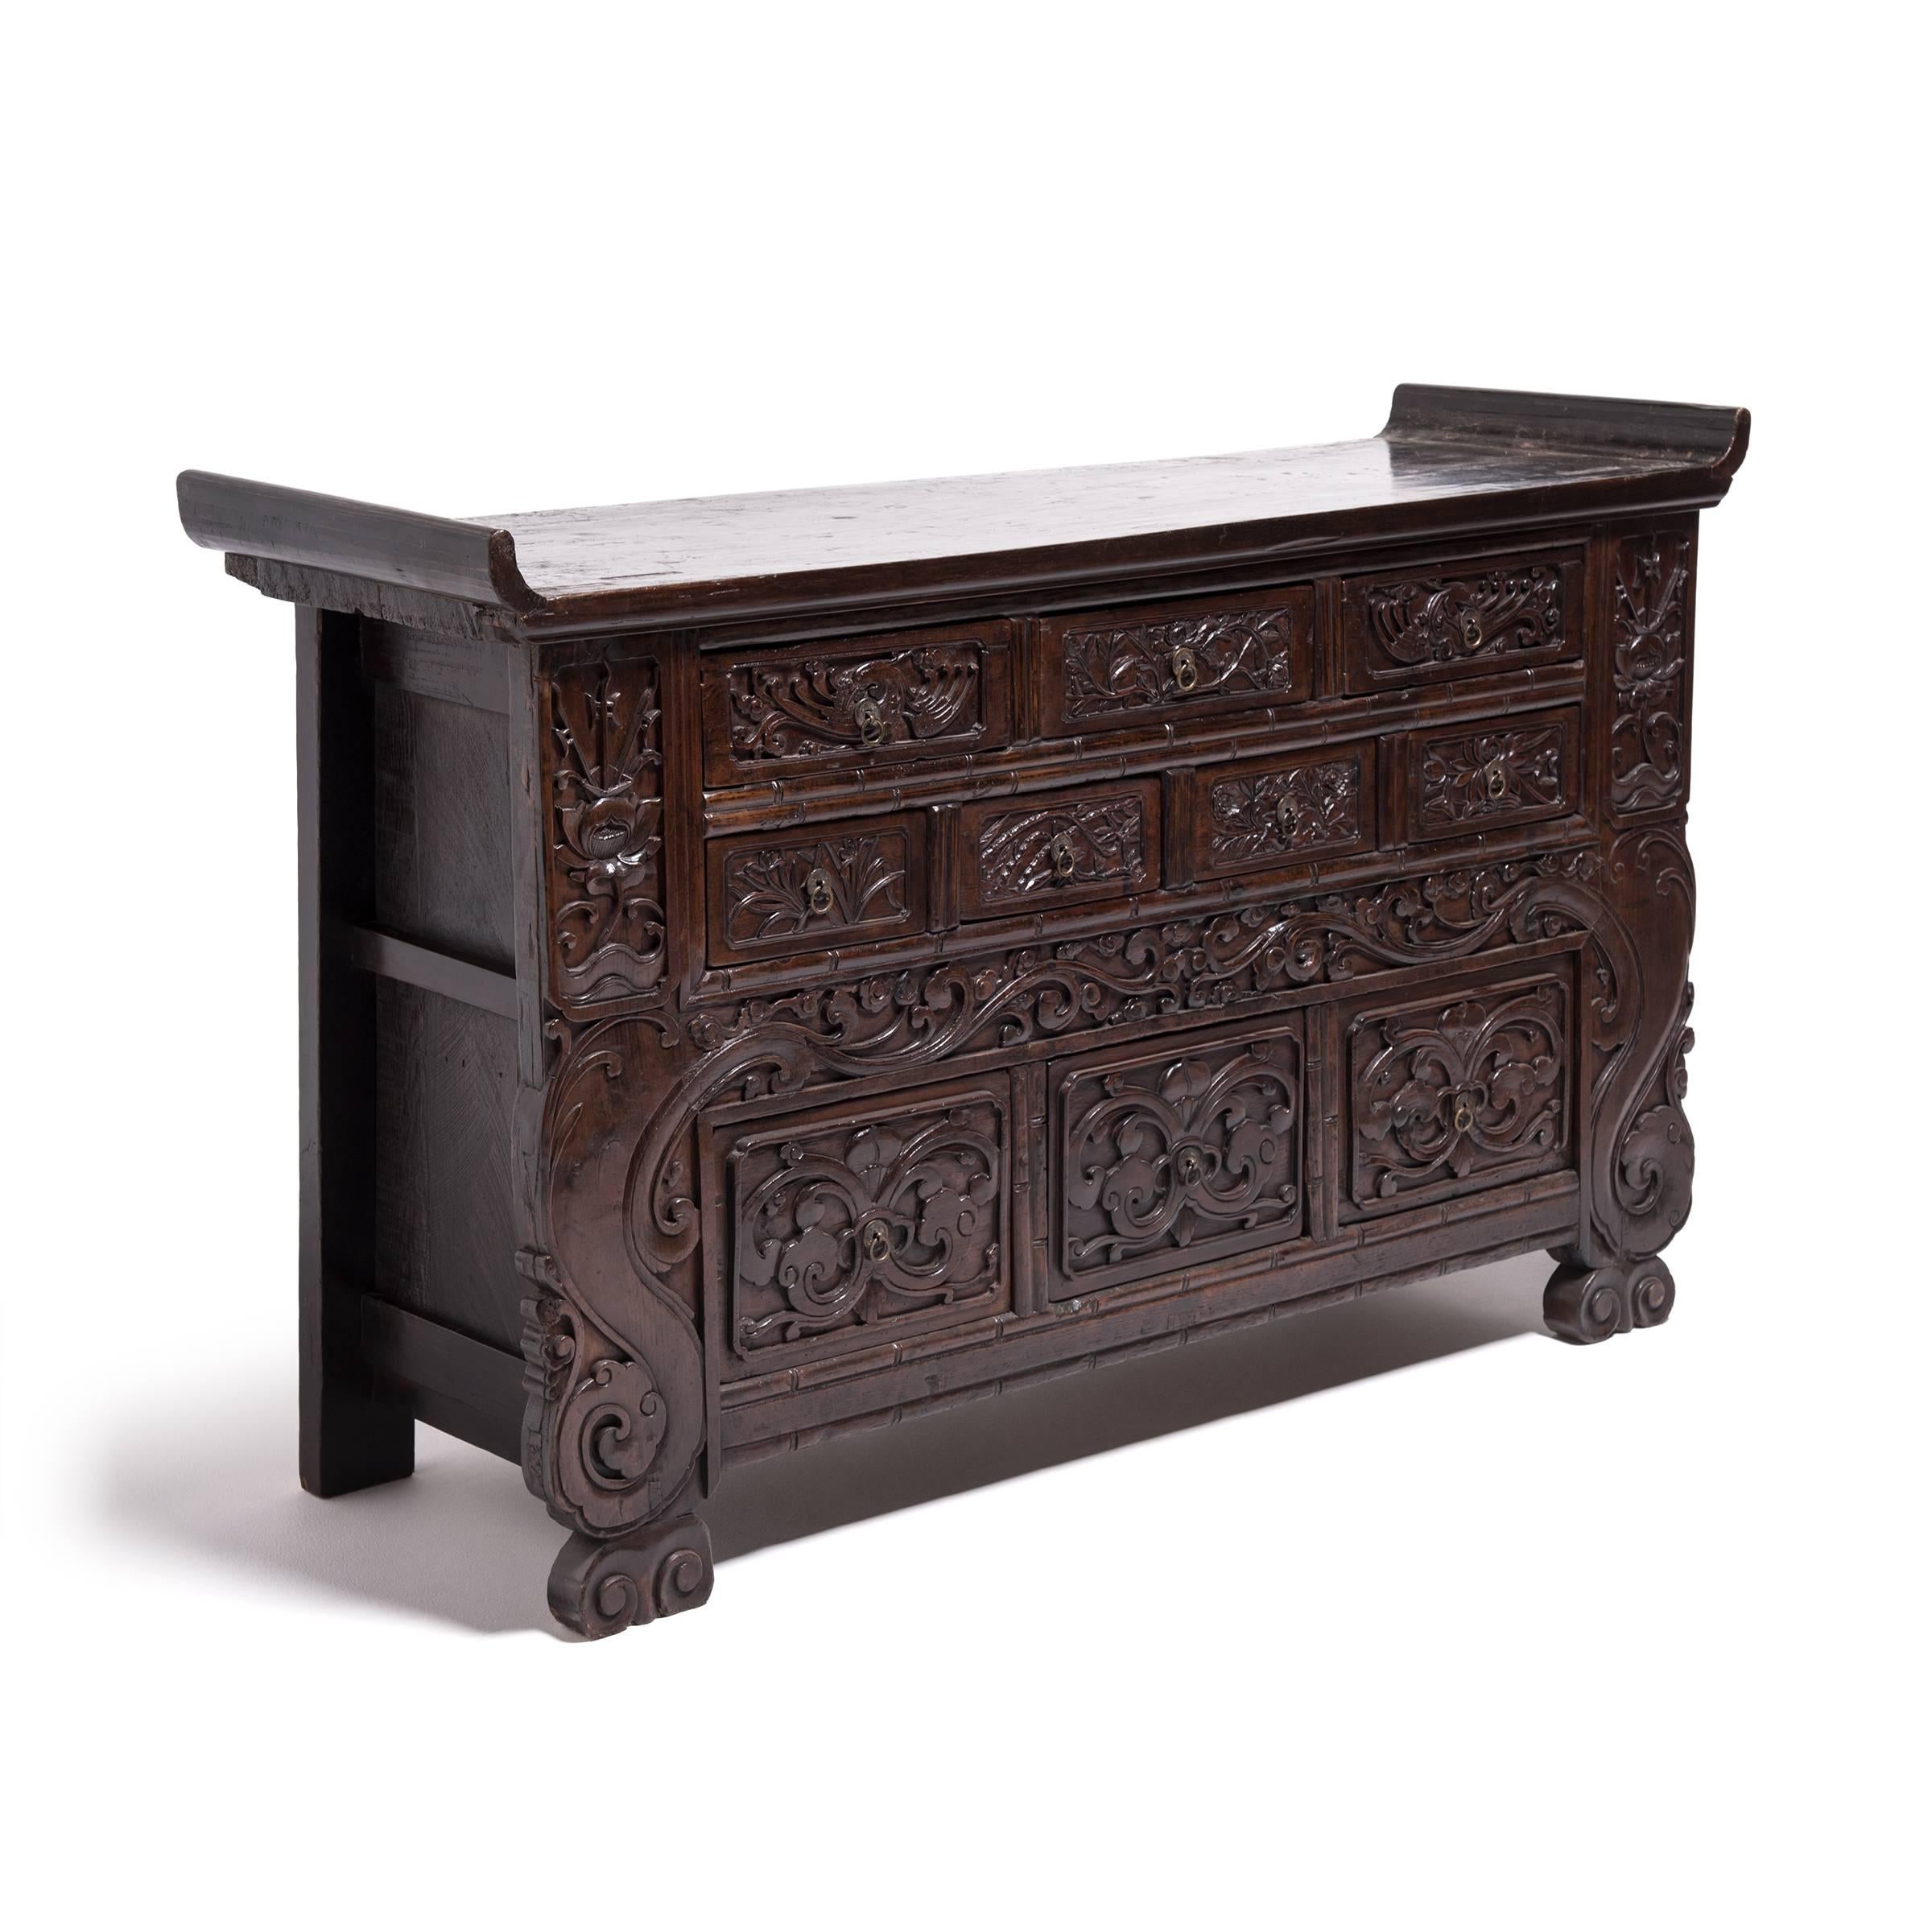 Hand-Carved Chinese Carved Ten-Drawer Chest, c. 1850